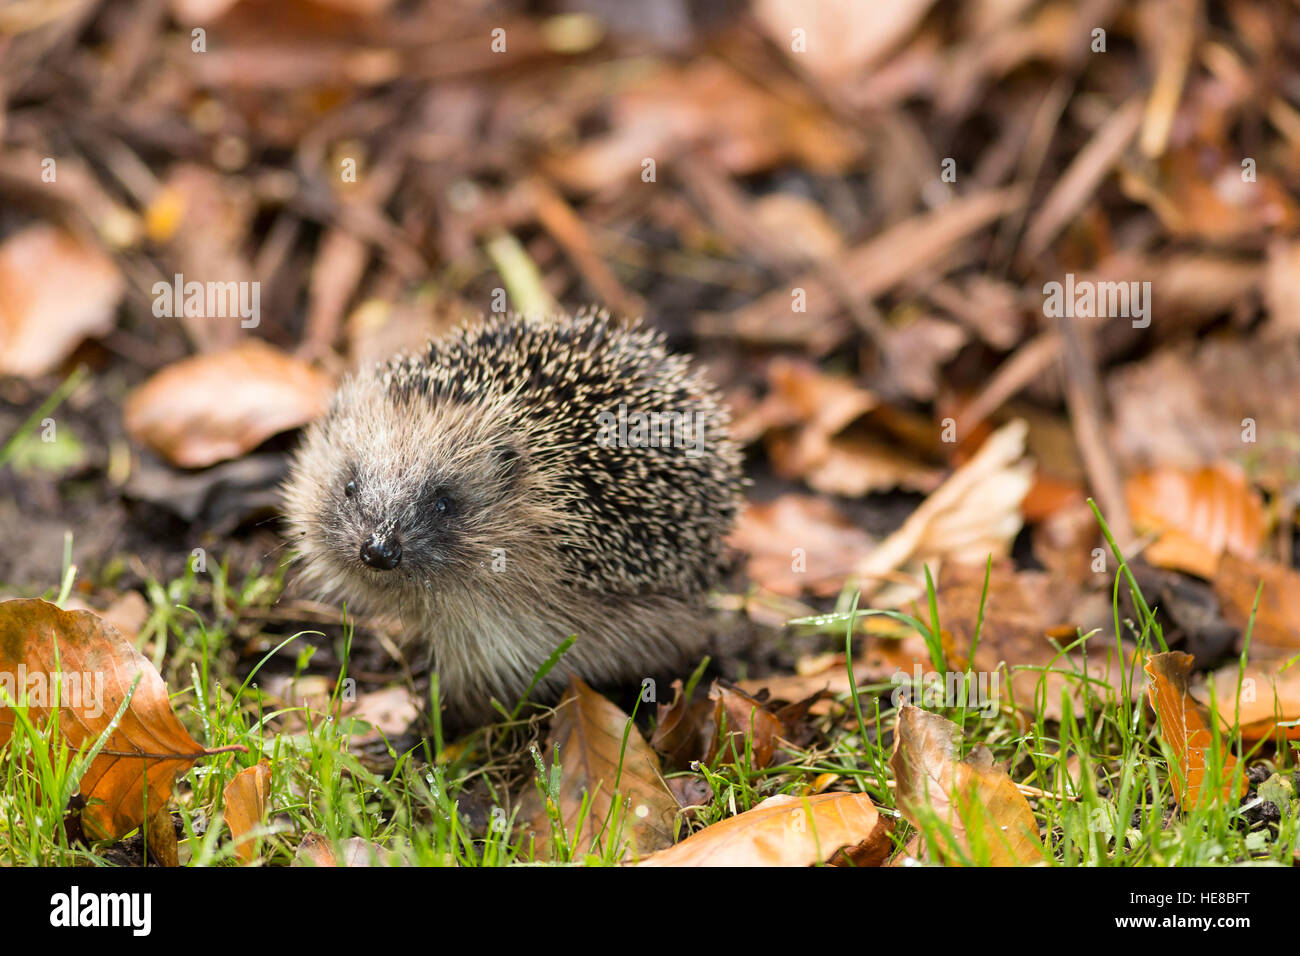 young hedgehog in autumn leaf litter Stock Photo